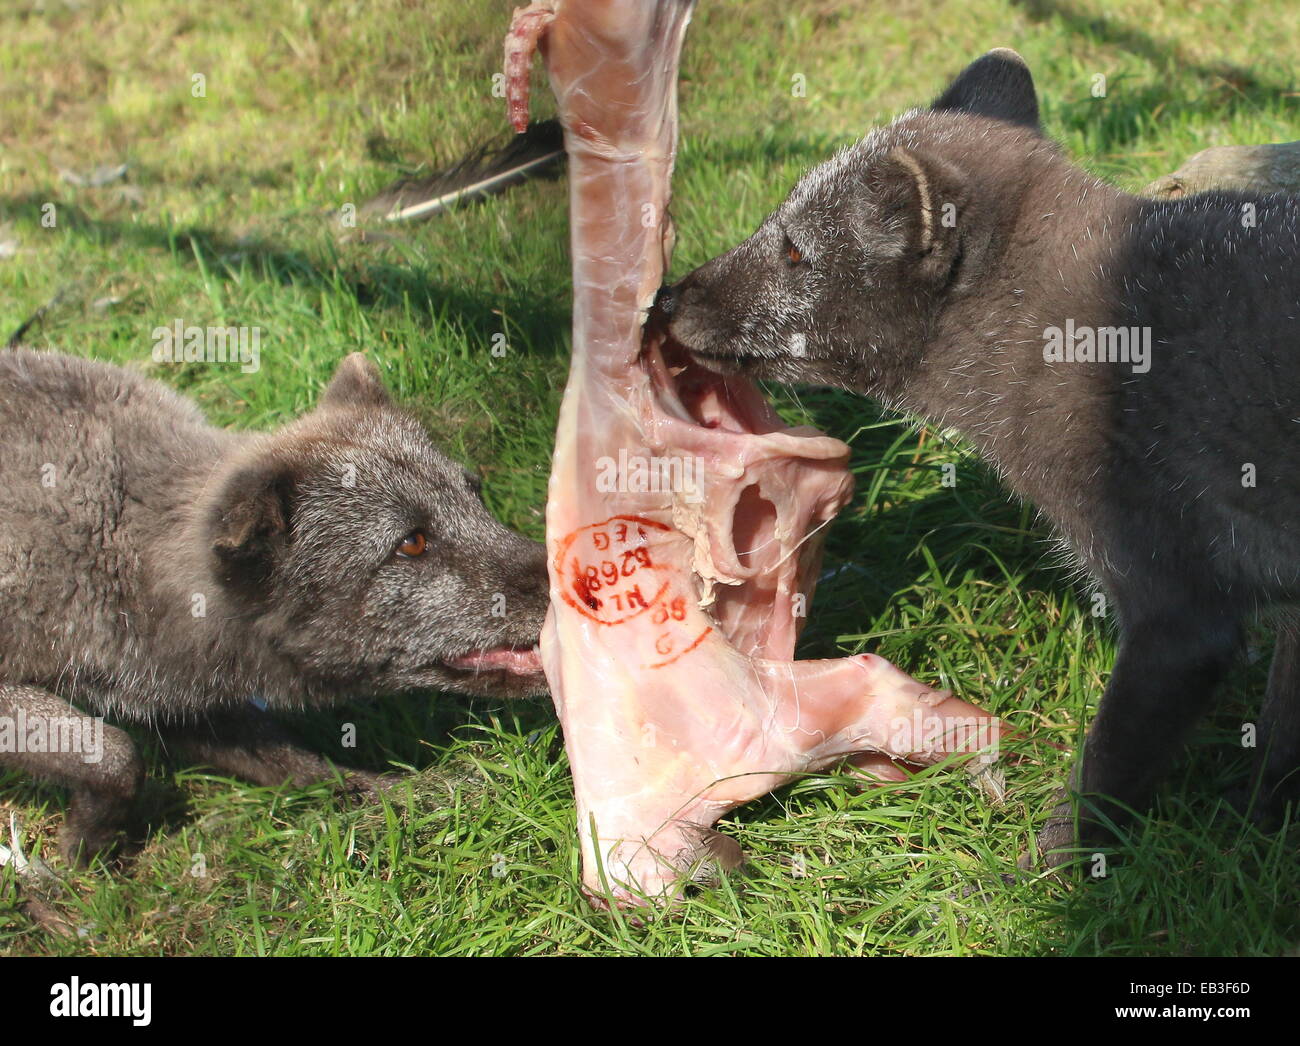 Arctic or Polar Foxes (Vulpes lagopus) feeding on meat at Rotterdam Blijdorp Zoo, The Netherlands Stock Photo